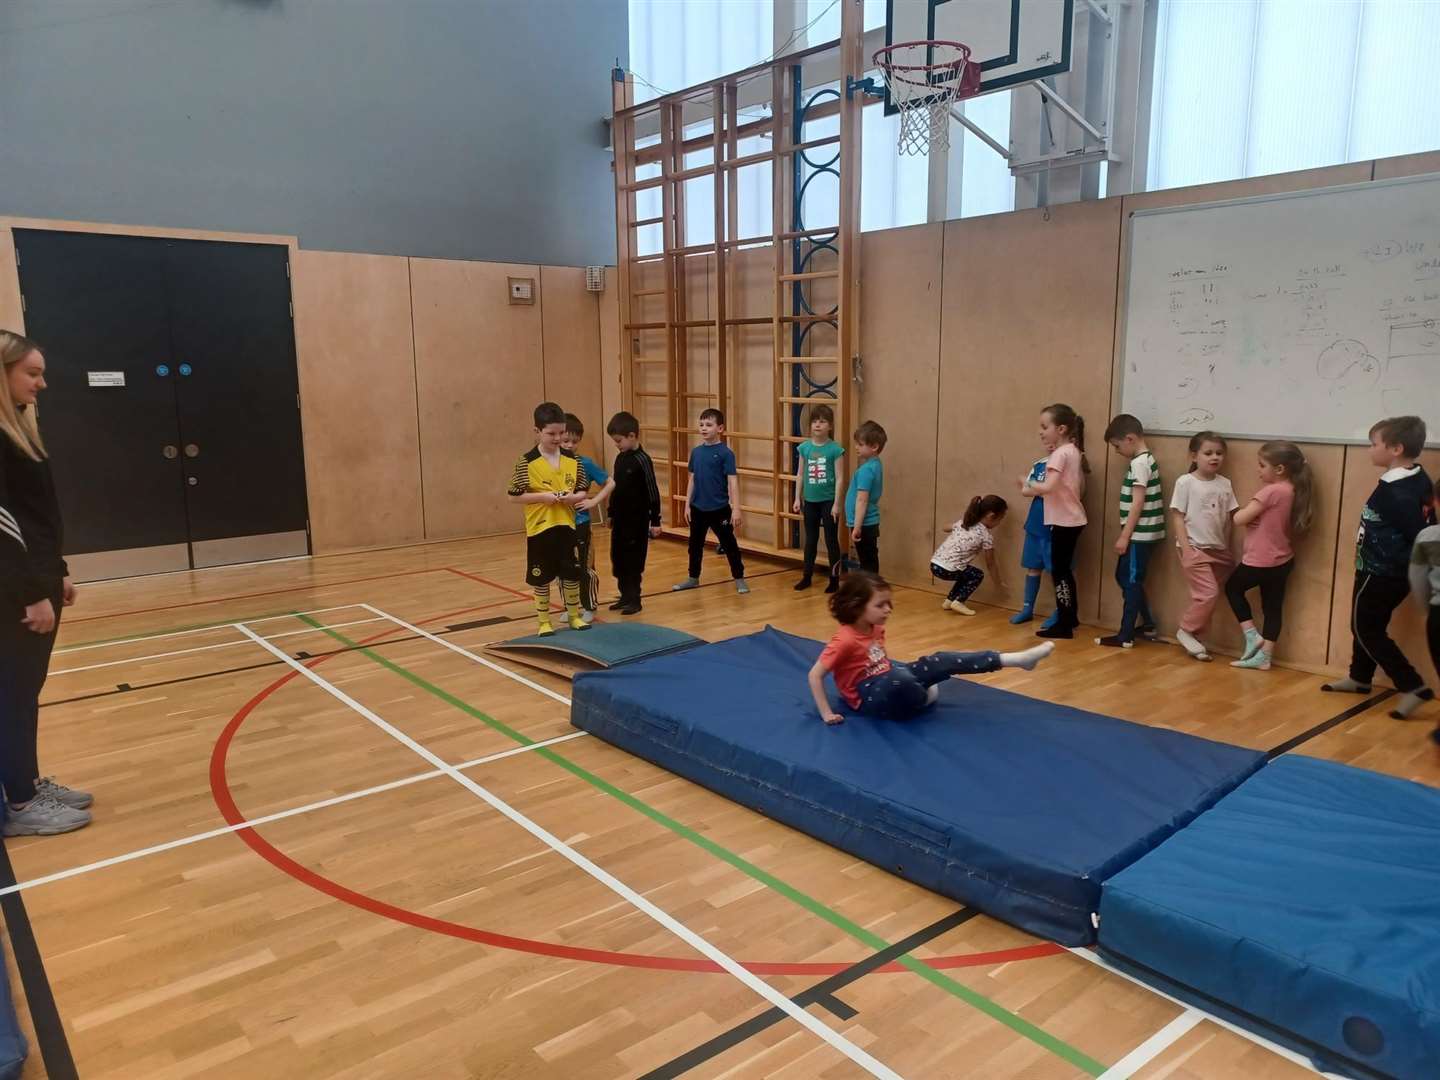 Gymnastics was among the activities on offer for the children.